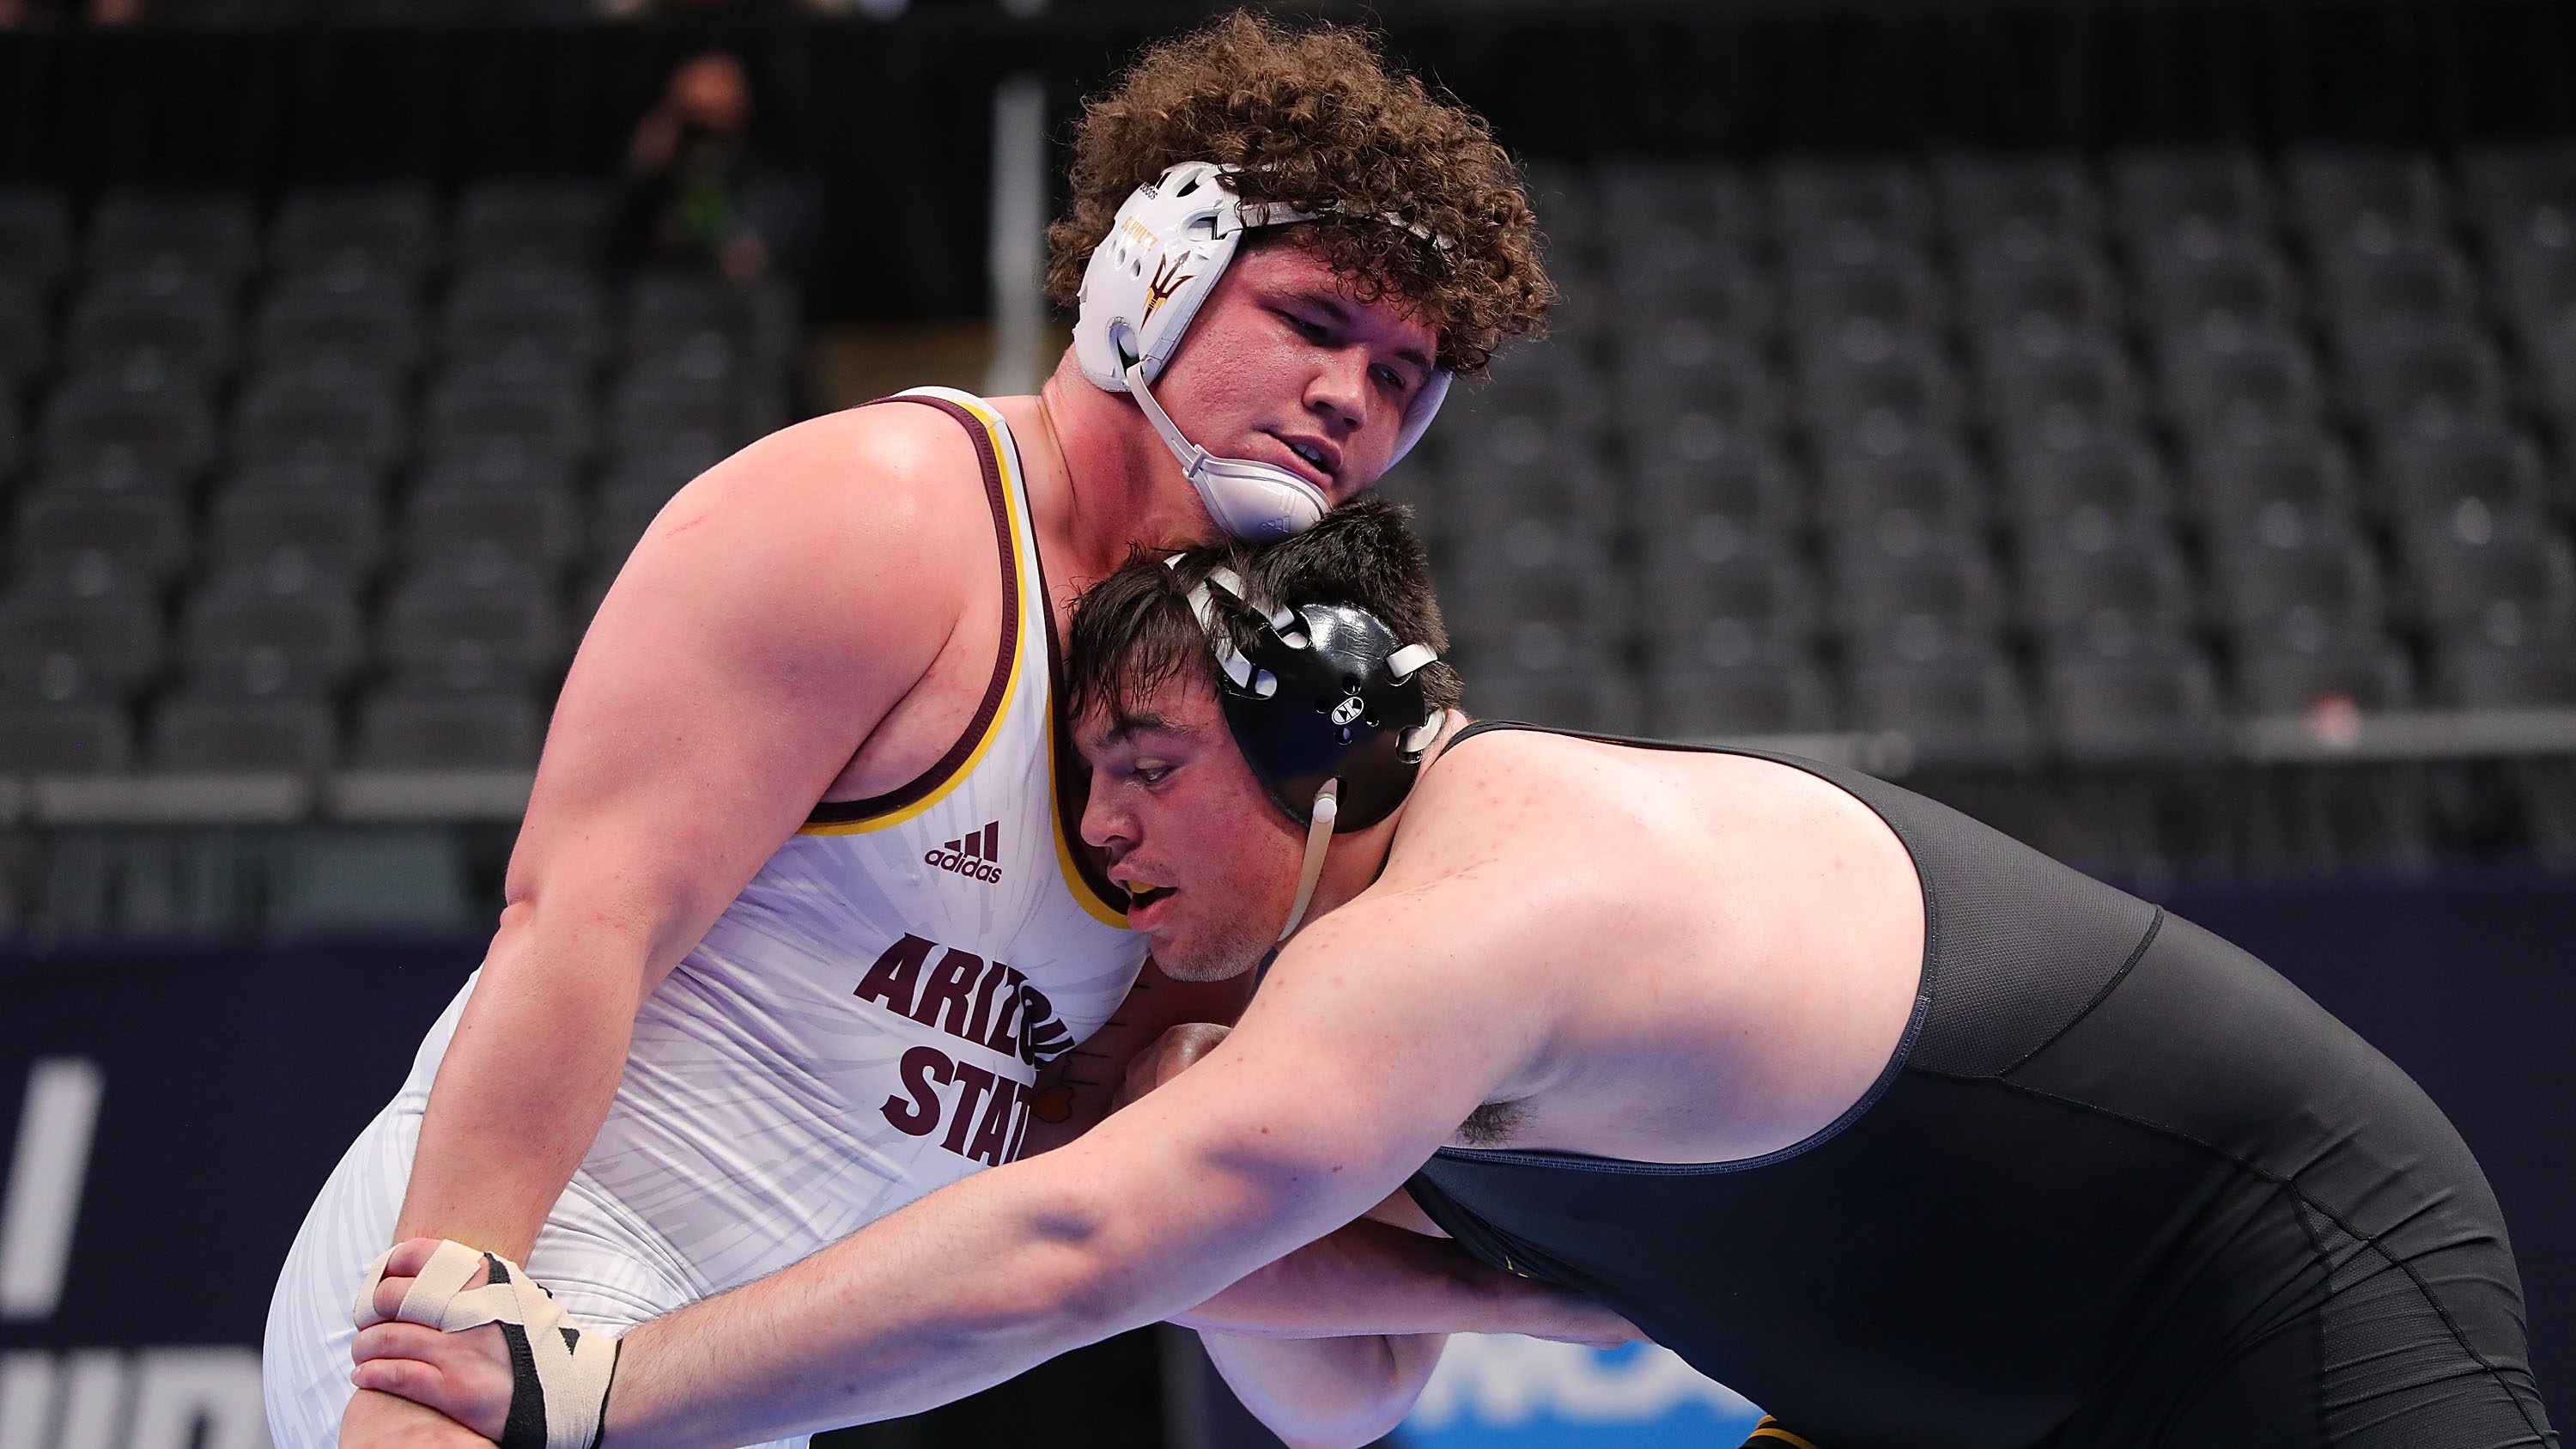 How to Watch Pac12 Wrestling Championships 2022 Online